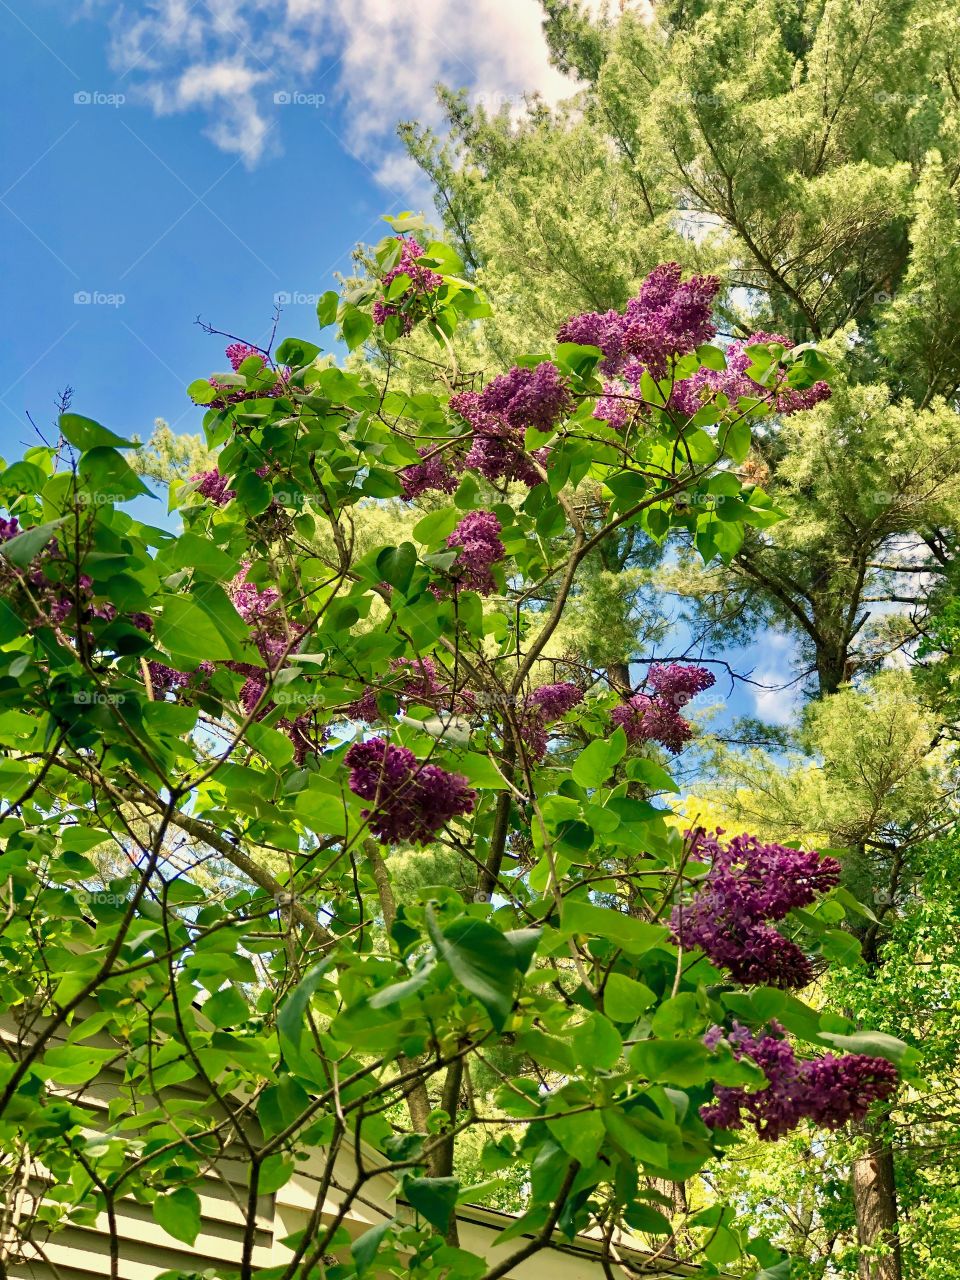 Surrounded by lush greenery, a purple Lilac Bush blooming against a pale blue sky on a beautiful Spring day 